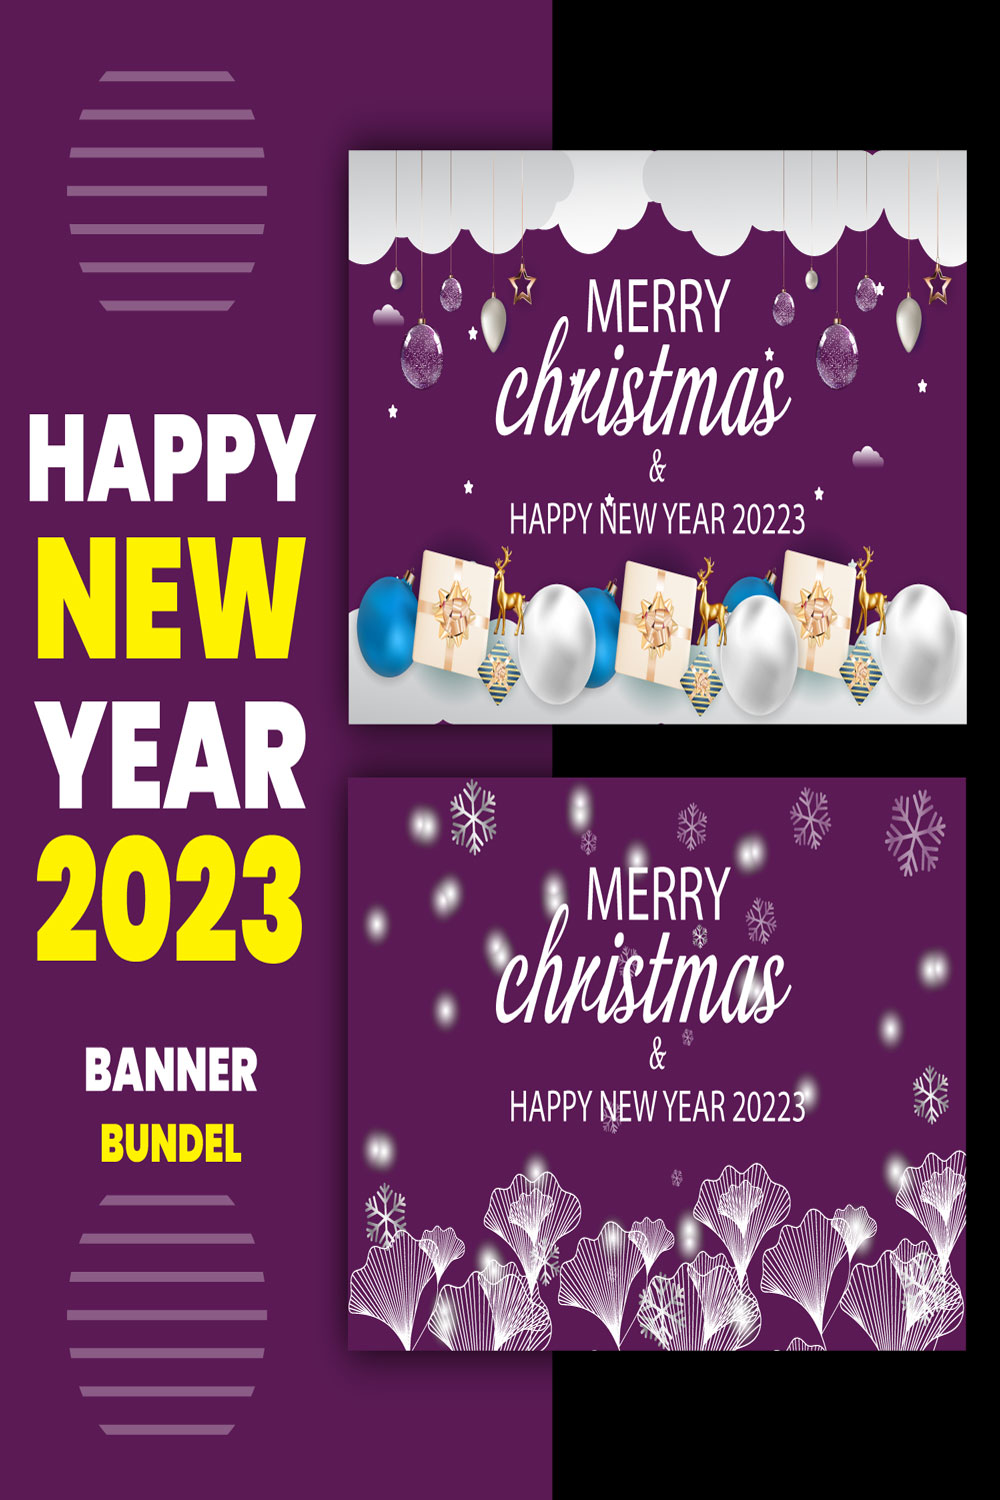 Happy New Year and Merry Christmas 2023 Banner Design pinterest image.